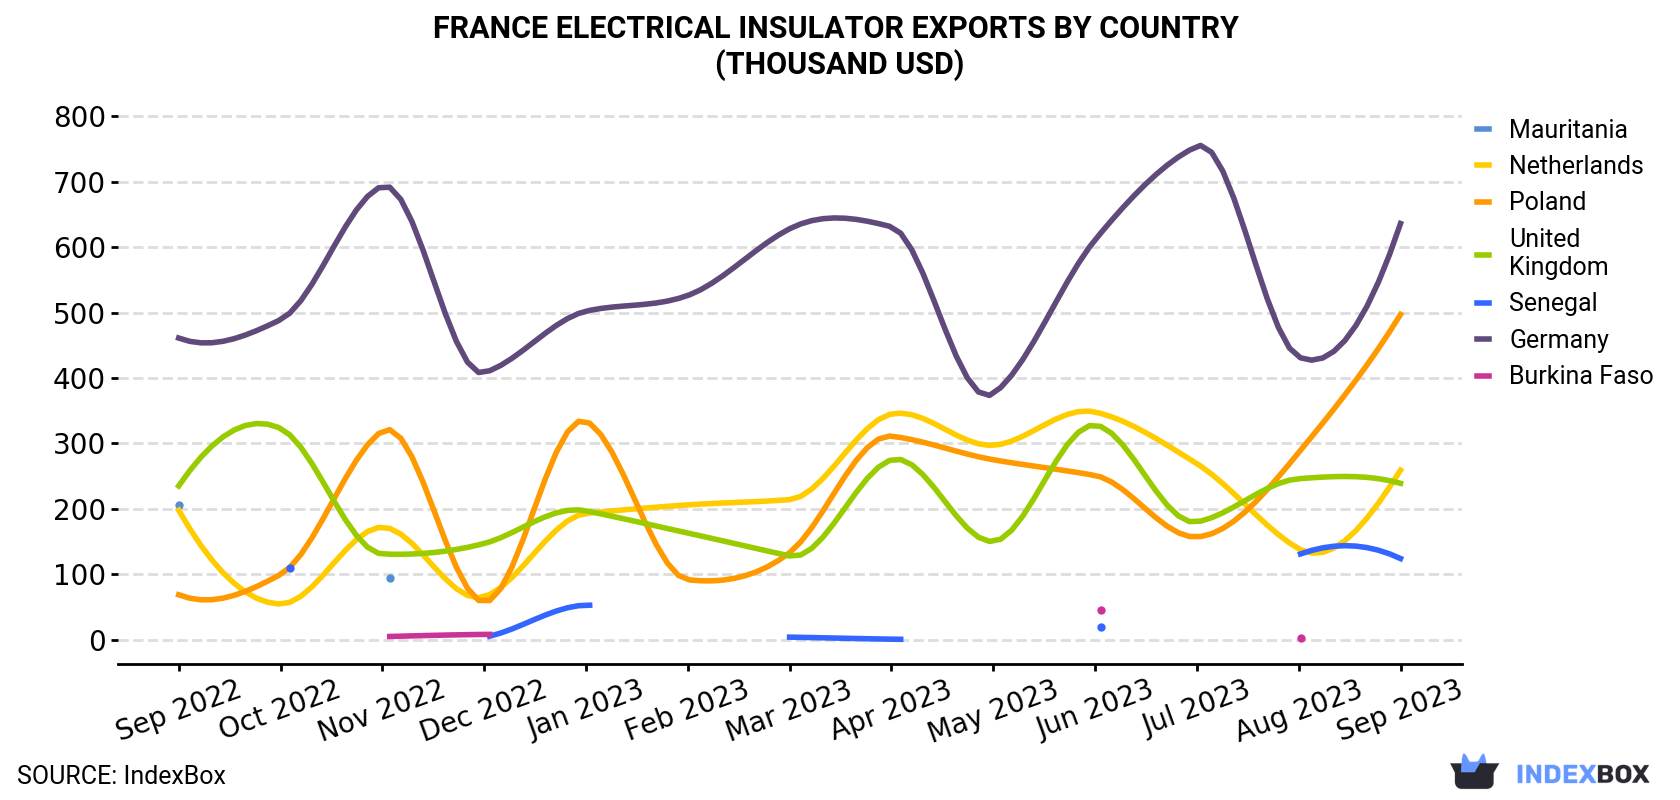 France Electrical Insulator Exports By Country (Thousand USD)